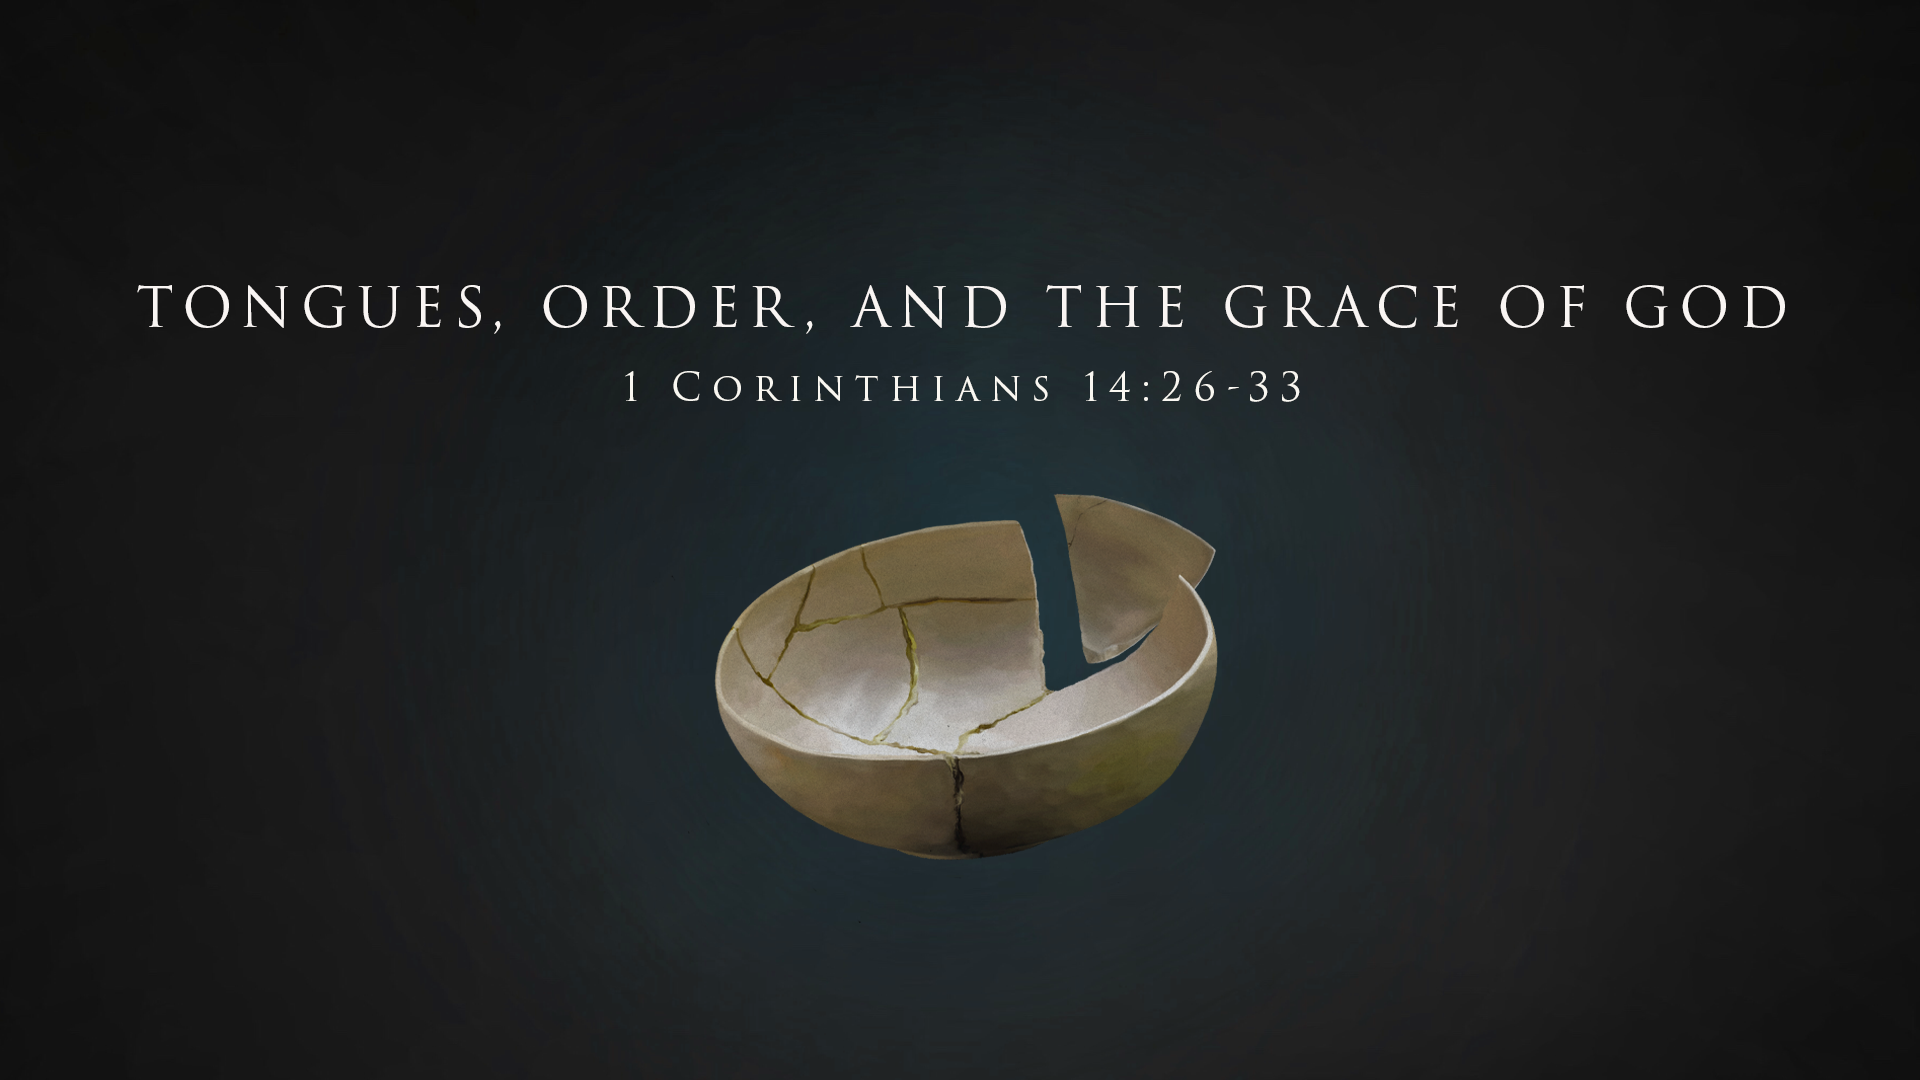 Spiritual Gifts Part 5: Order and Tongues